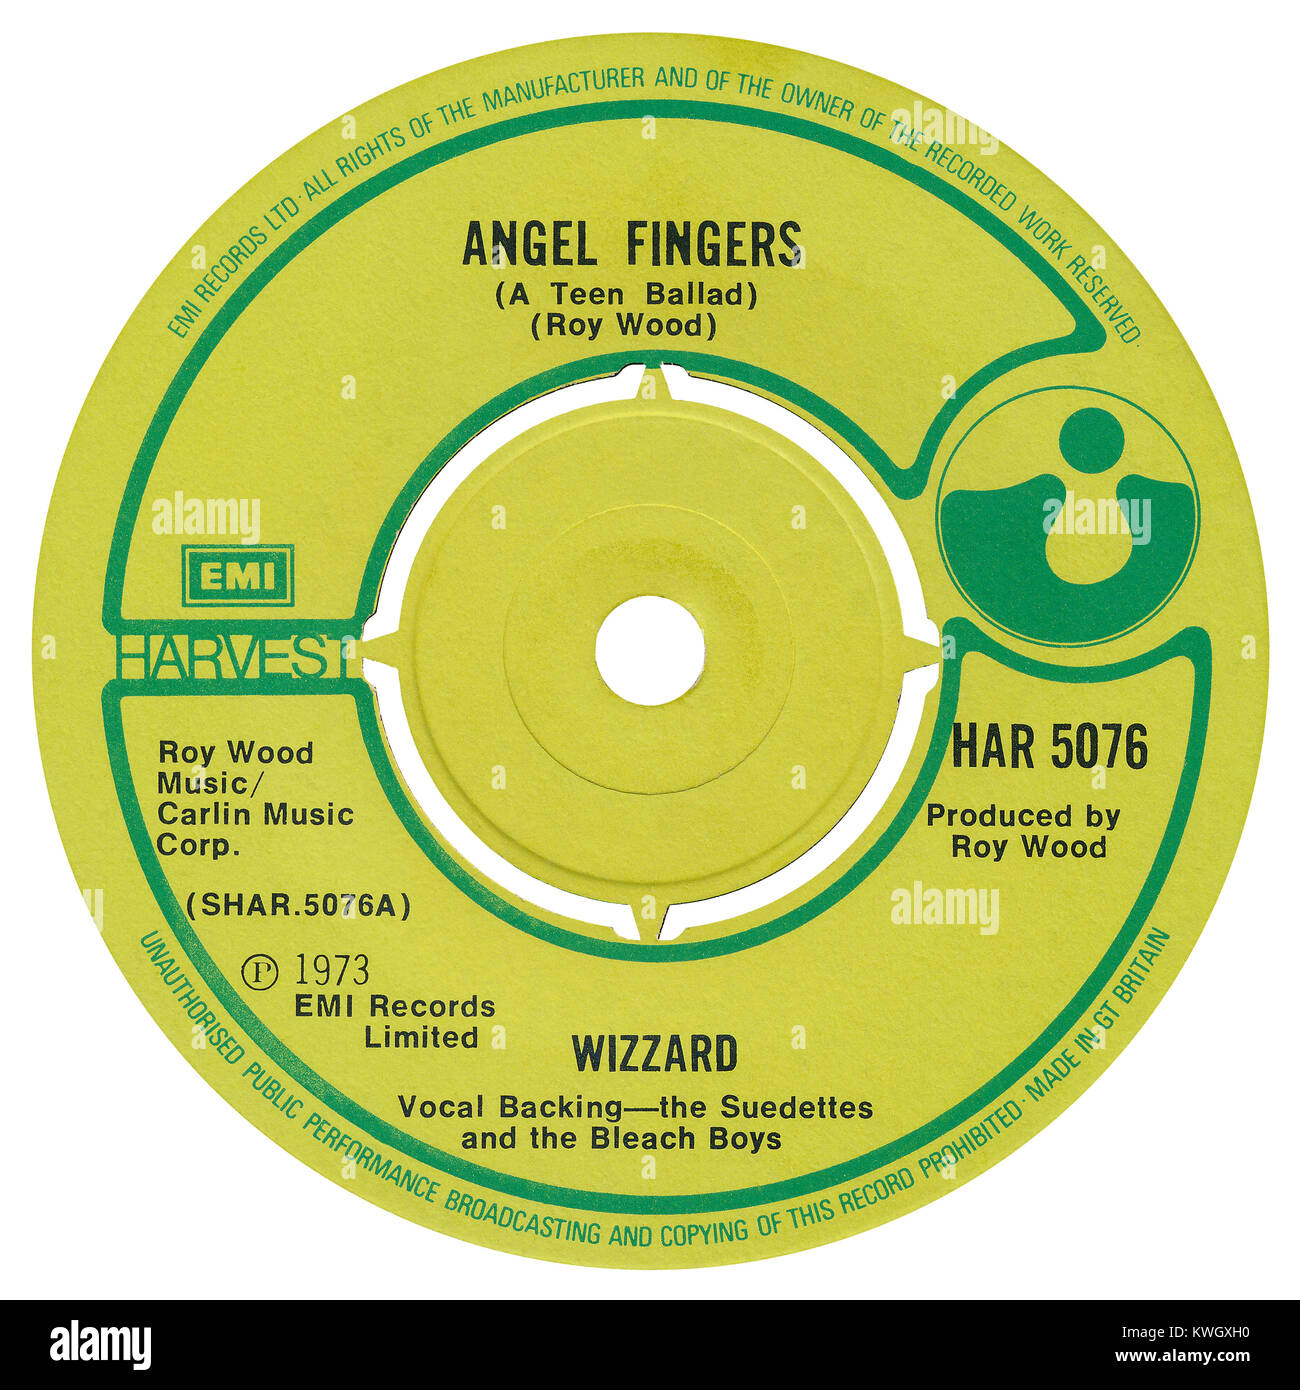 45 RPM 7' UK record label of Angel Fingers (A Teen ballad) by Wizzard, Written and produced by Roy Wood. Released in August 1973 by Harvest Records. Stock Photo